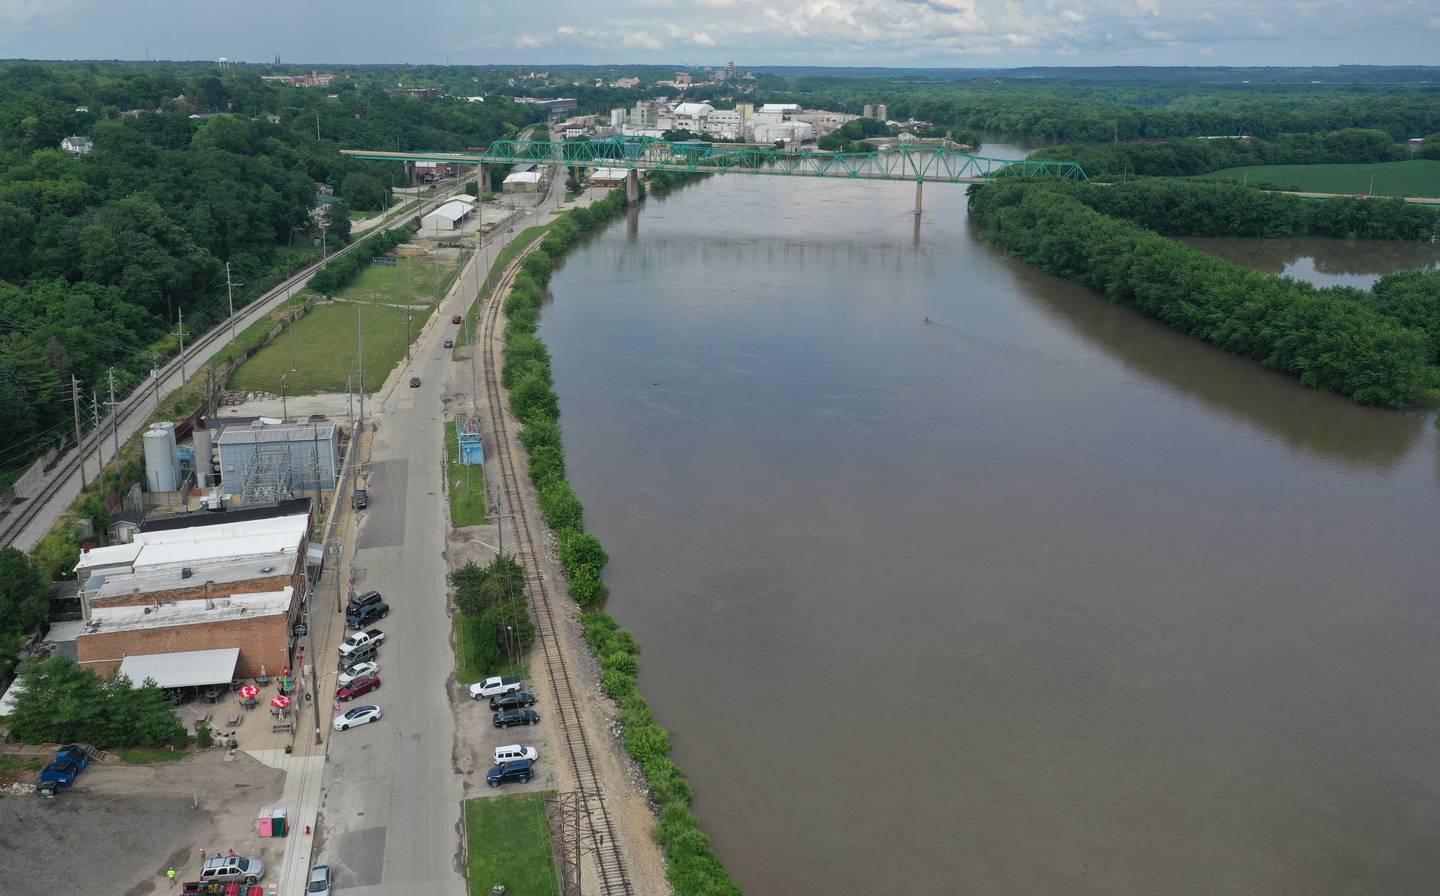 The Illinois River swells up to the top of its banks along Water Street in Peru on Monday June 28, 2021. The Peru fireworks are still scheduled to be launched on the south shore of the river on Saturday July 3, at dusk.